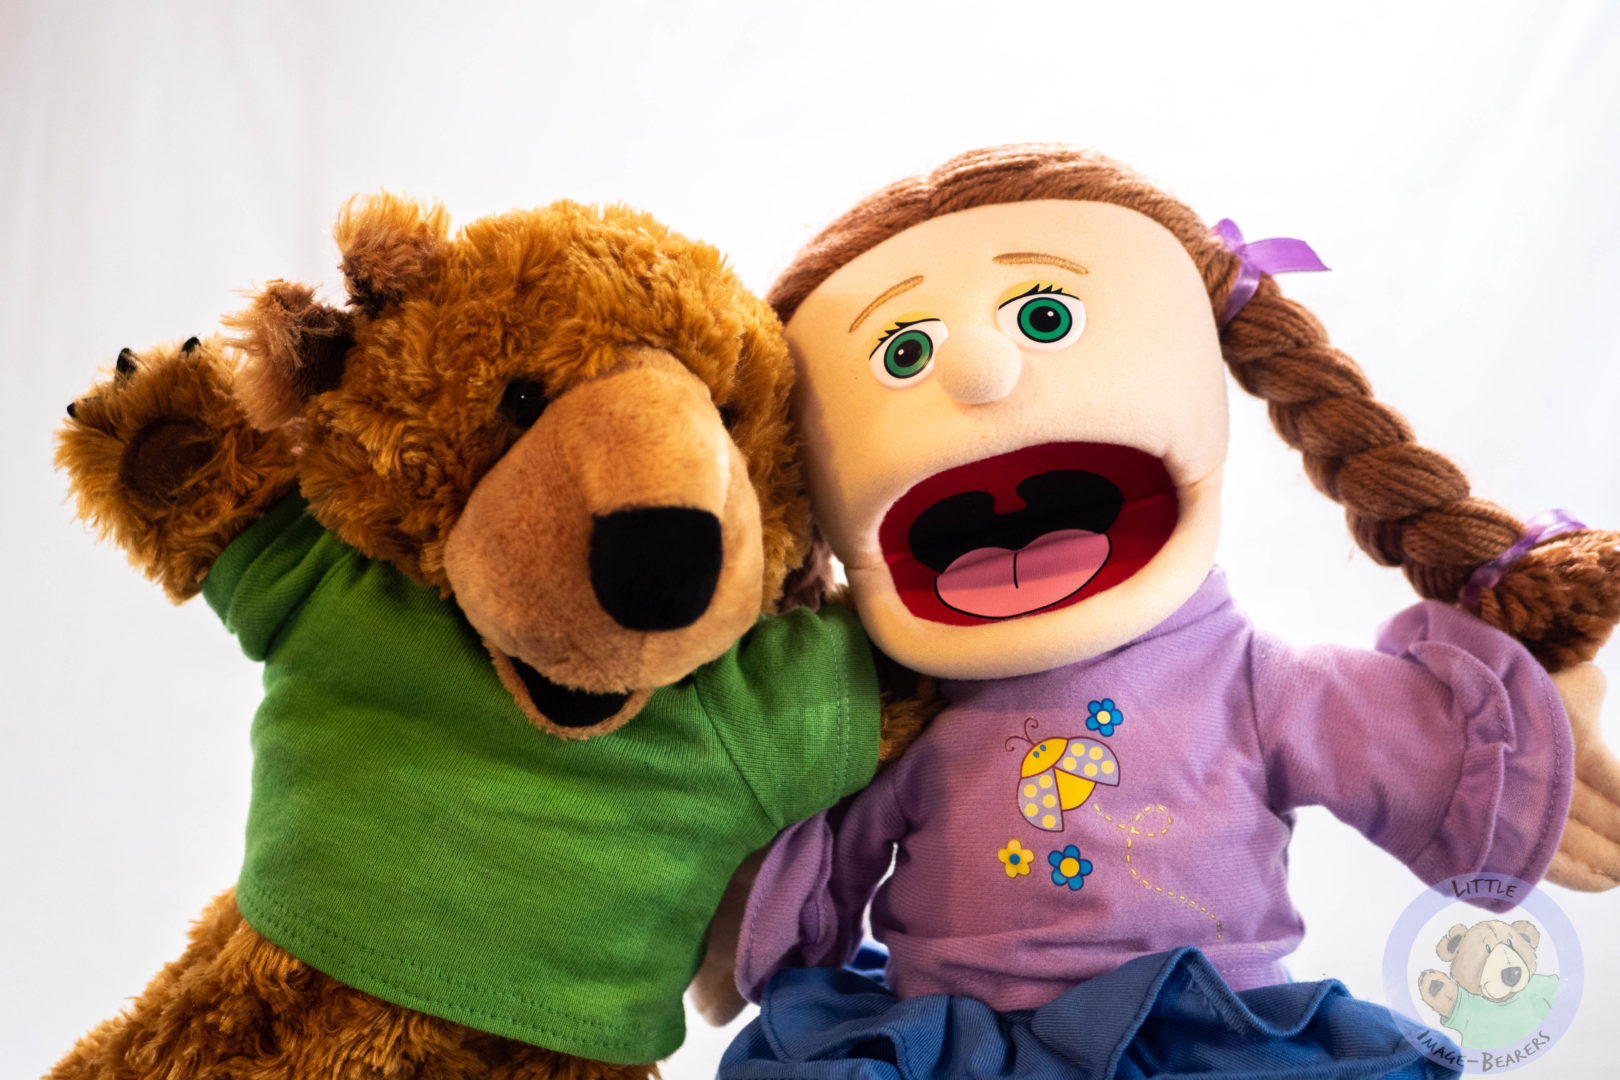 Little Image-Bearers is a faith-based children’s show designed for children ages 2-8.